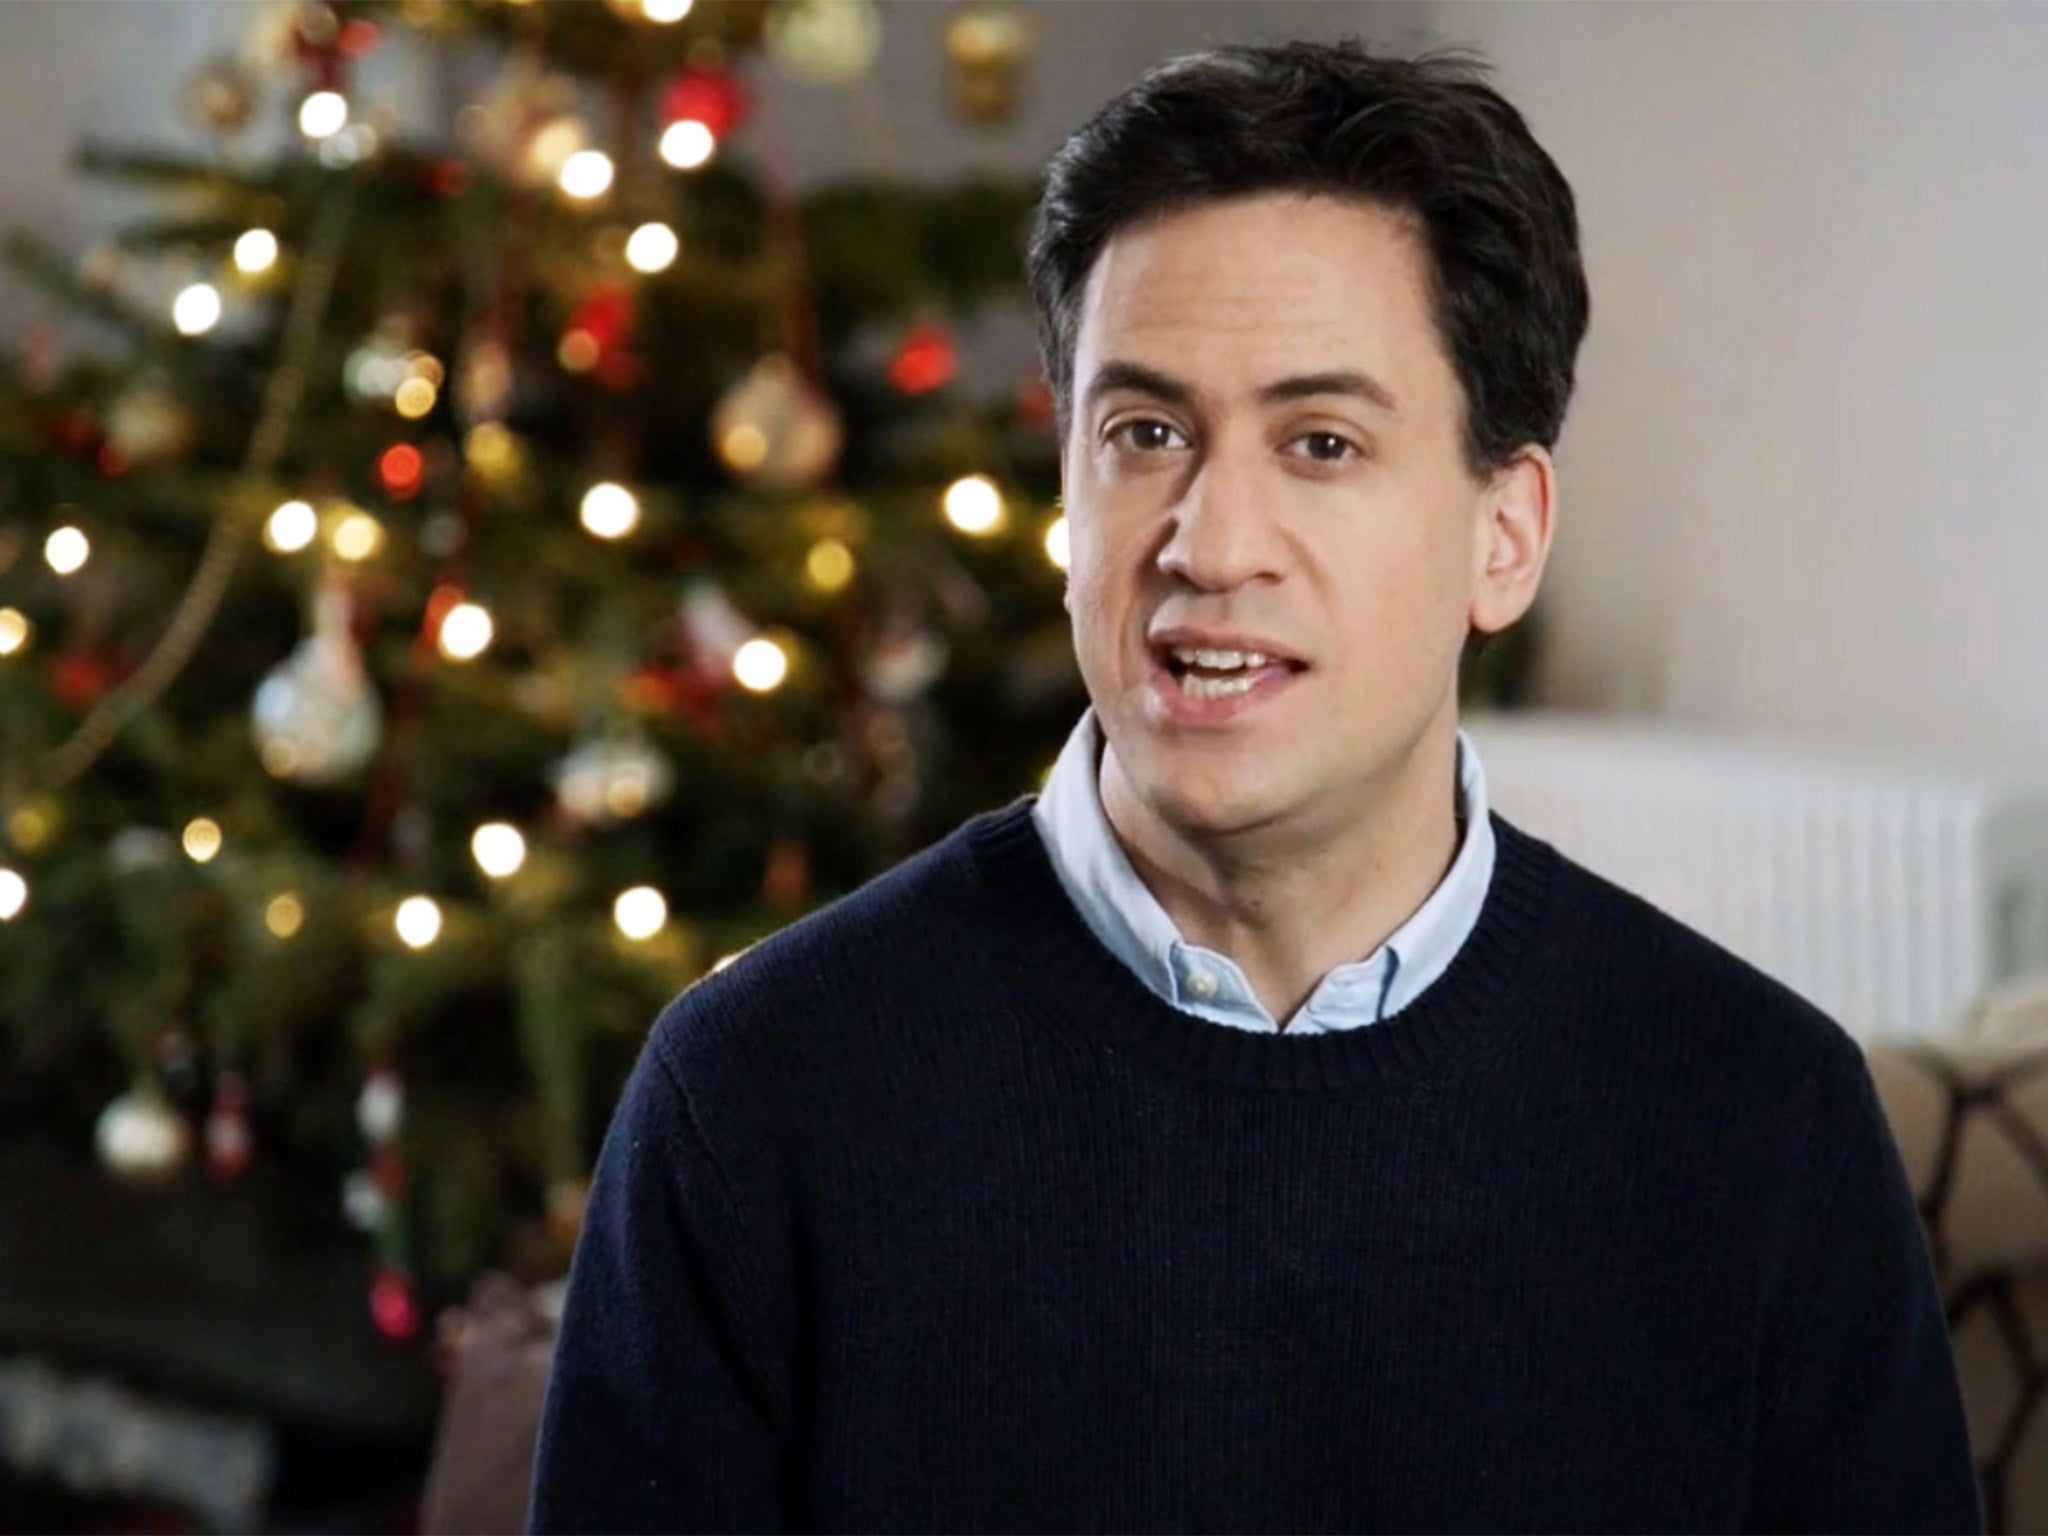 Ed Miliband gives his New Year message promising to focus on the economy